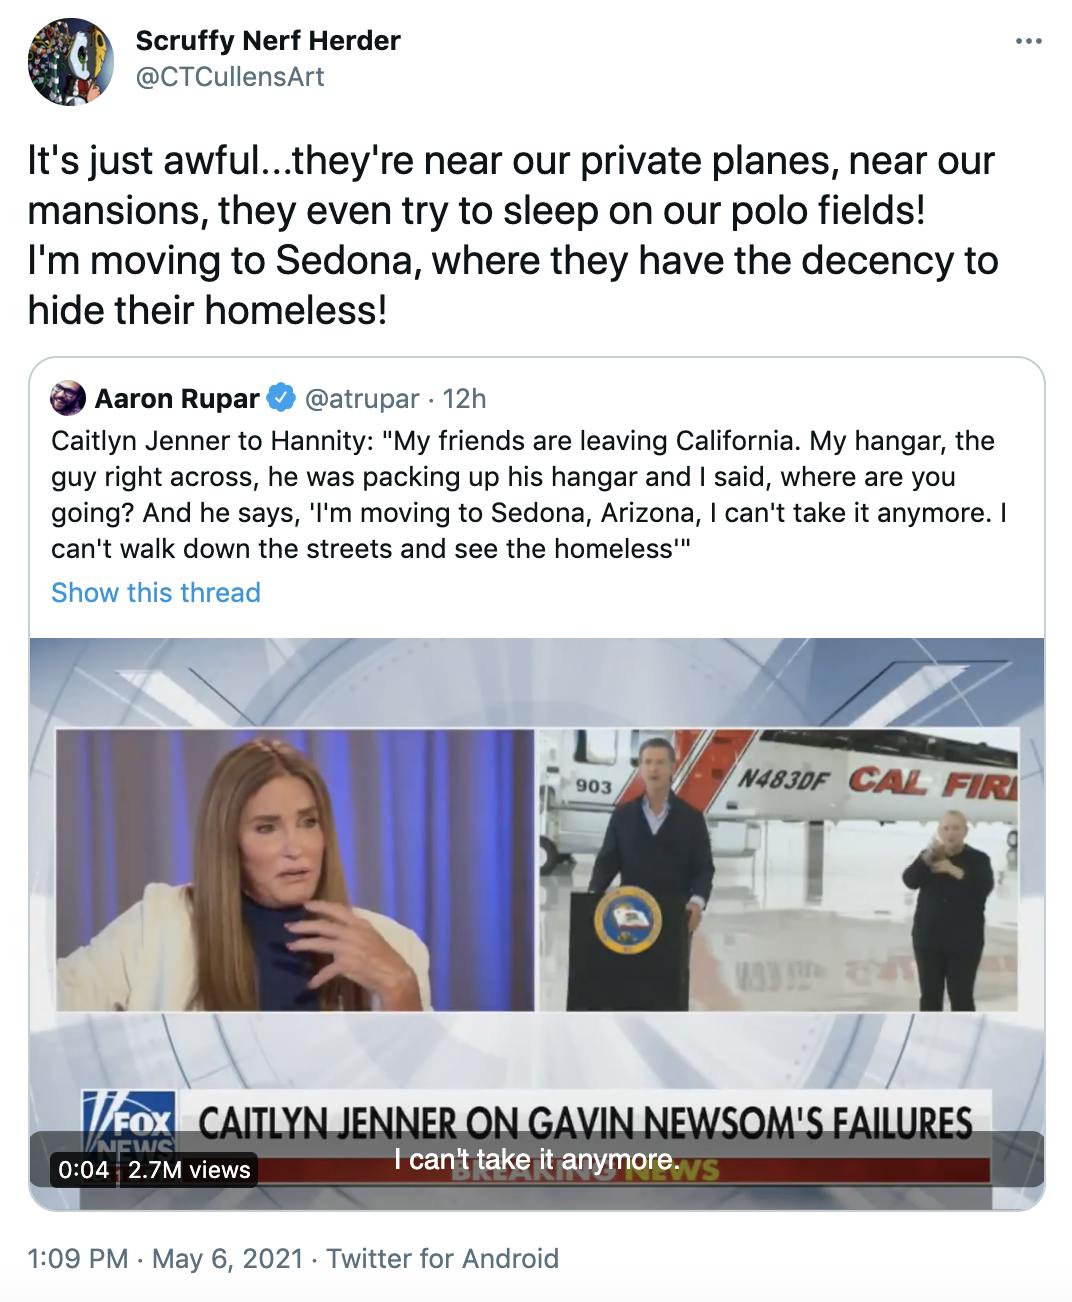 It's just awful...they're near our private planes, near our mansions, they even try to sleep on our polo fields! I'm moving to Sedona, where they have the decency to hide their homeless!